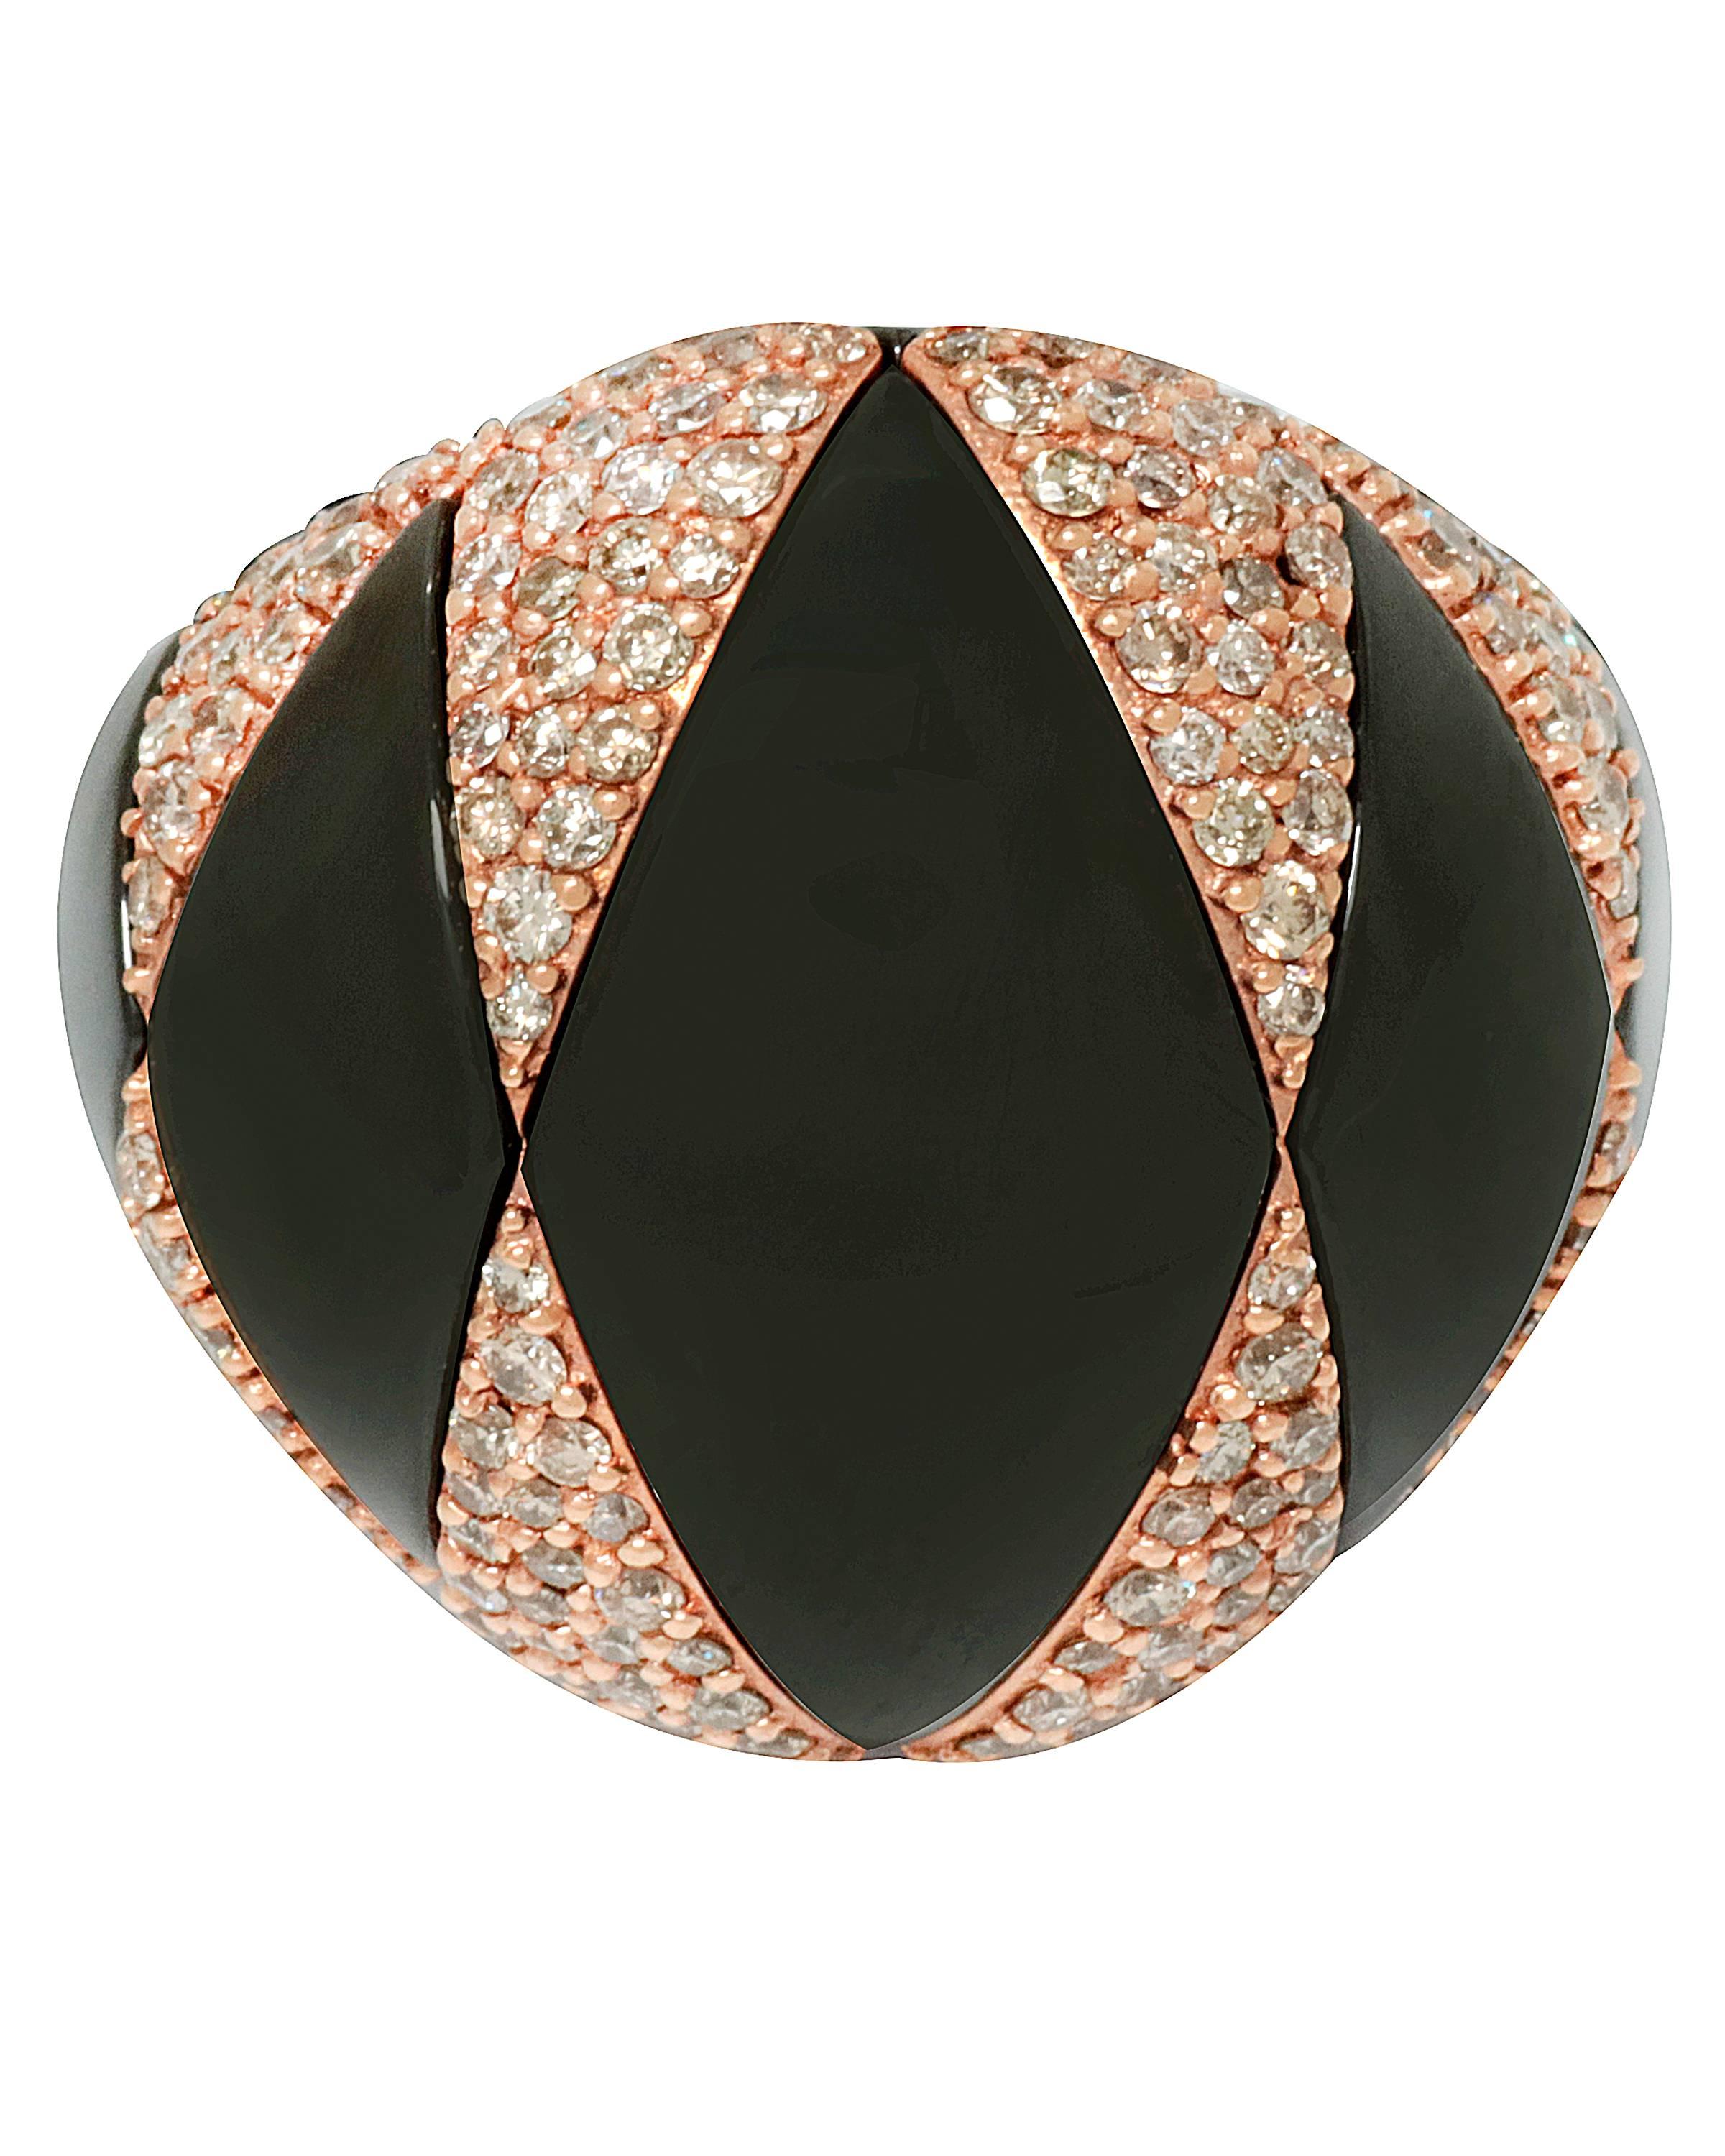 Roberto Demeglio Black Ceramic and 18k Rose Gold Ring. Ring Size 5.5. With Brown Diamond(2.04tcw). Flexible. Total Weight:23.5g. Shipped in Roberto Demeglio Box.MSRP $4,920